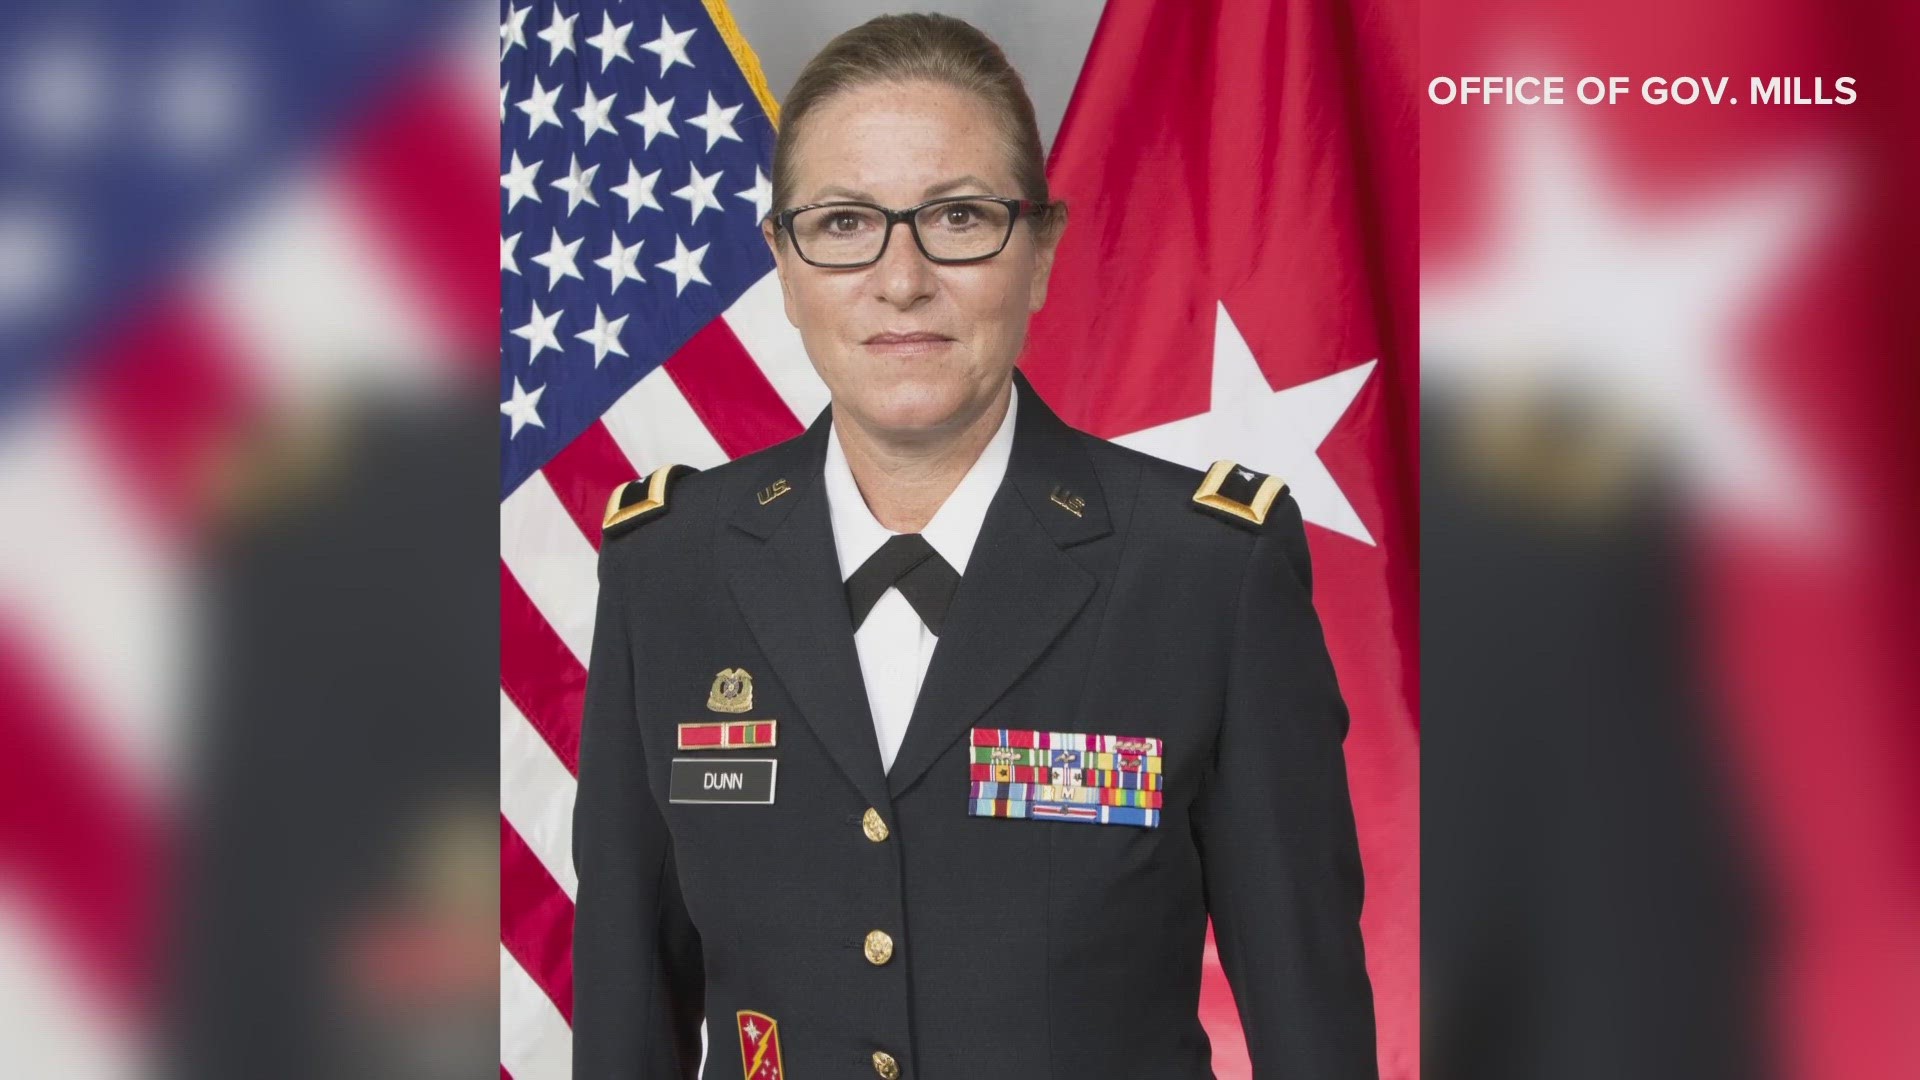 Mills announced the retirement of Maine Adjutant General Douglas A. Farnham and nominated retired U.S. Army Brigadier General Diane Dunn, on Dec. 15.